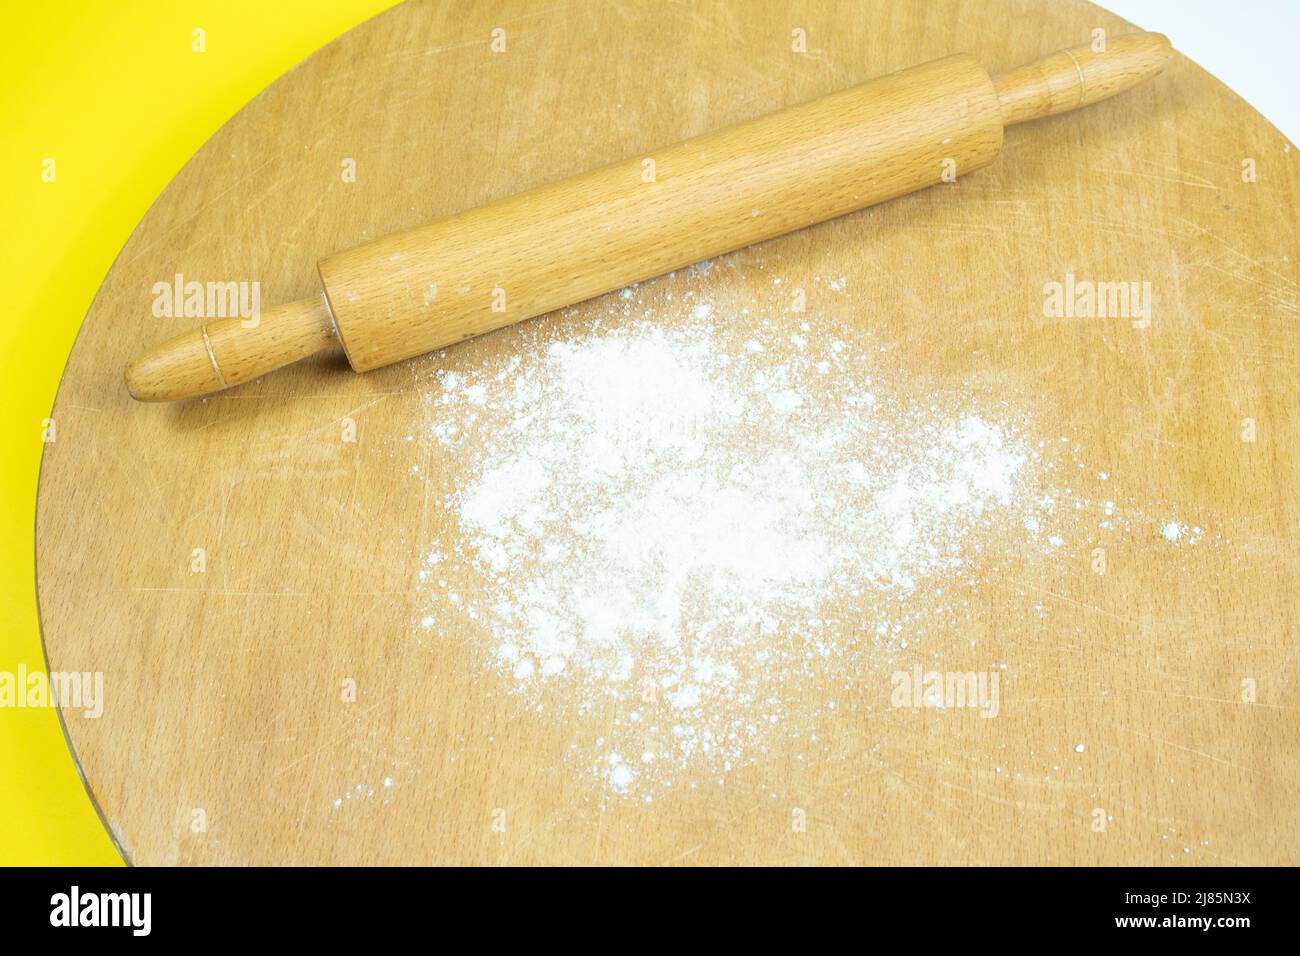 Rolling pin on traditional circle wooden board, top view of roller and some flour, cooking concept, making homemade bread Stock Photo